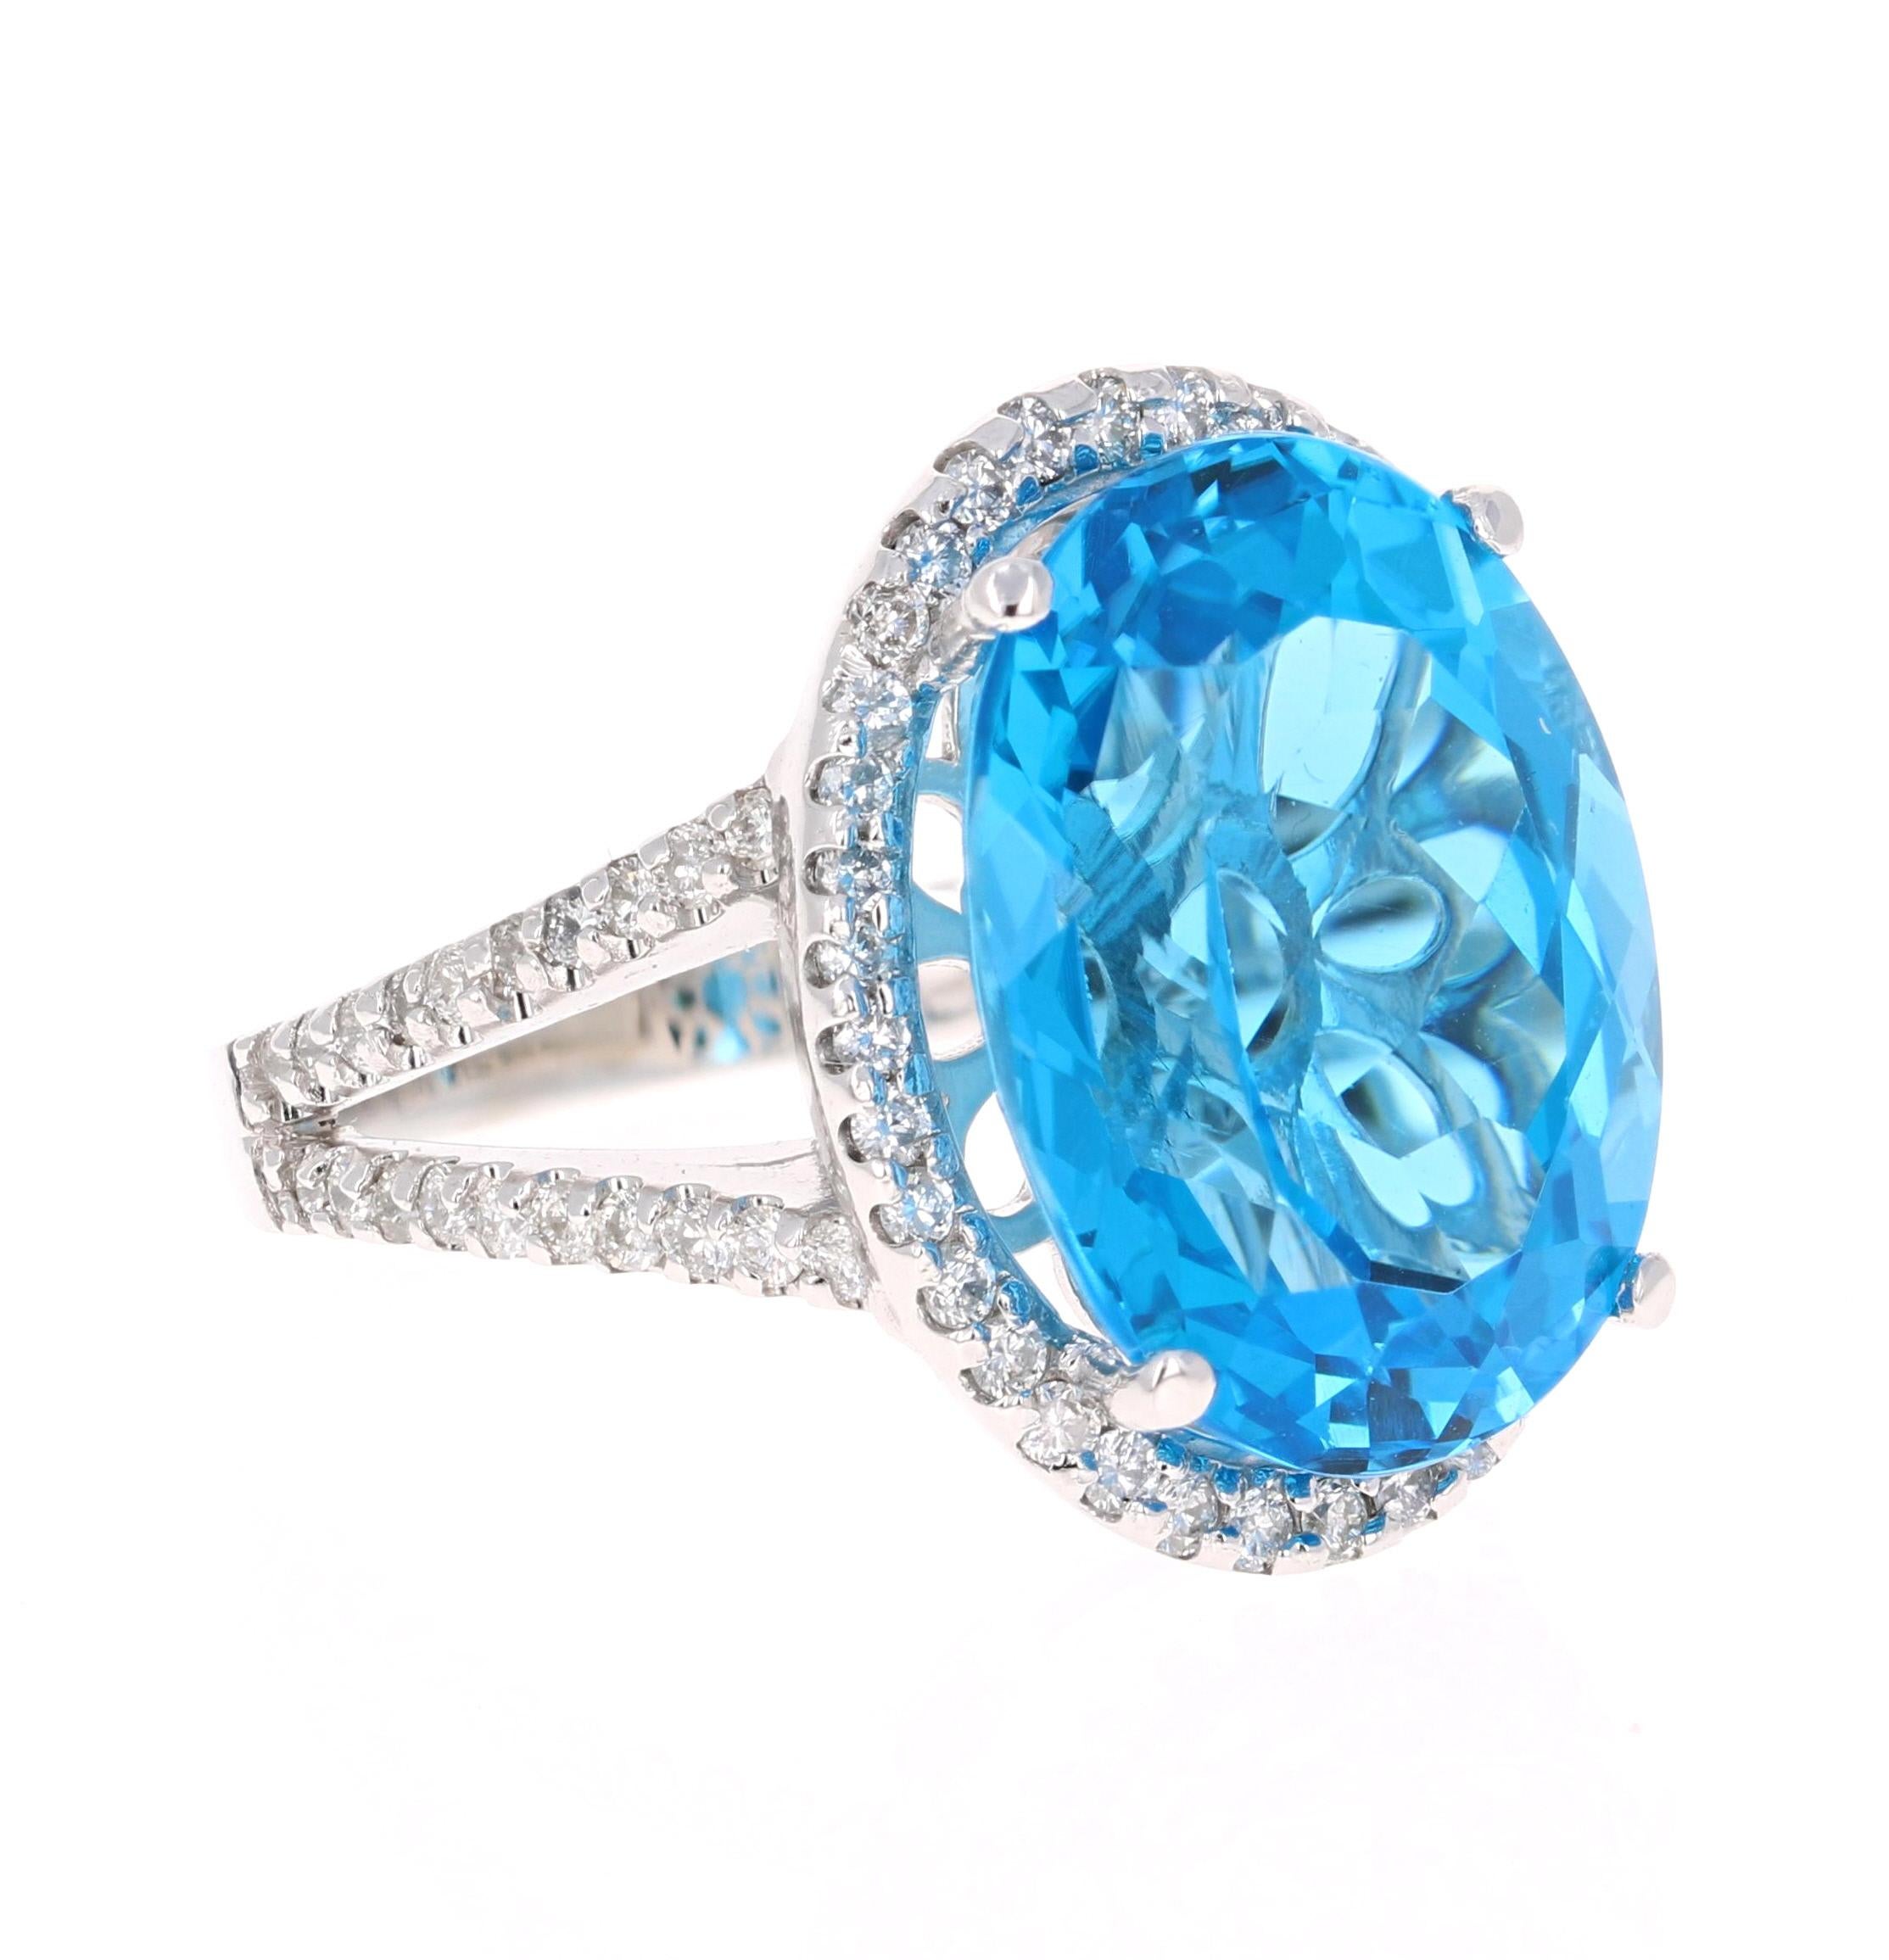 This stunning statement ring has a large Oval Cut Blue Topaz that weighs 17.27 Carats. 
It is surrounded by a simple halo of 76 Round Cut Diamonds that weigh 0.93 Carats. 

It is crafted in 14 Karat White Gold and weighs approximately 7.7 grams.